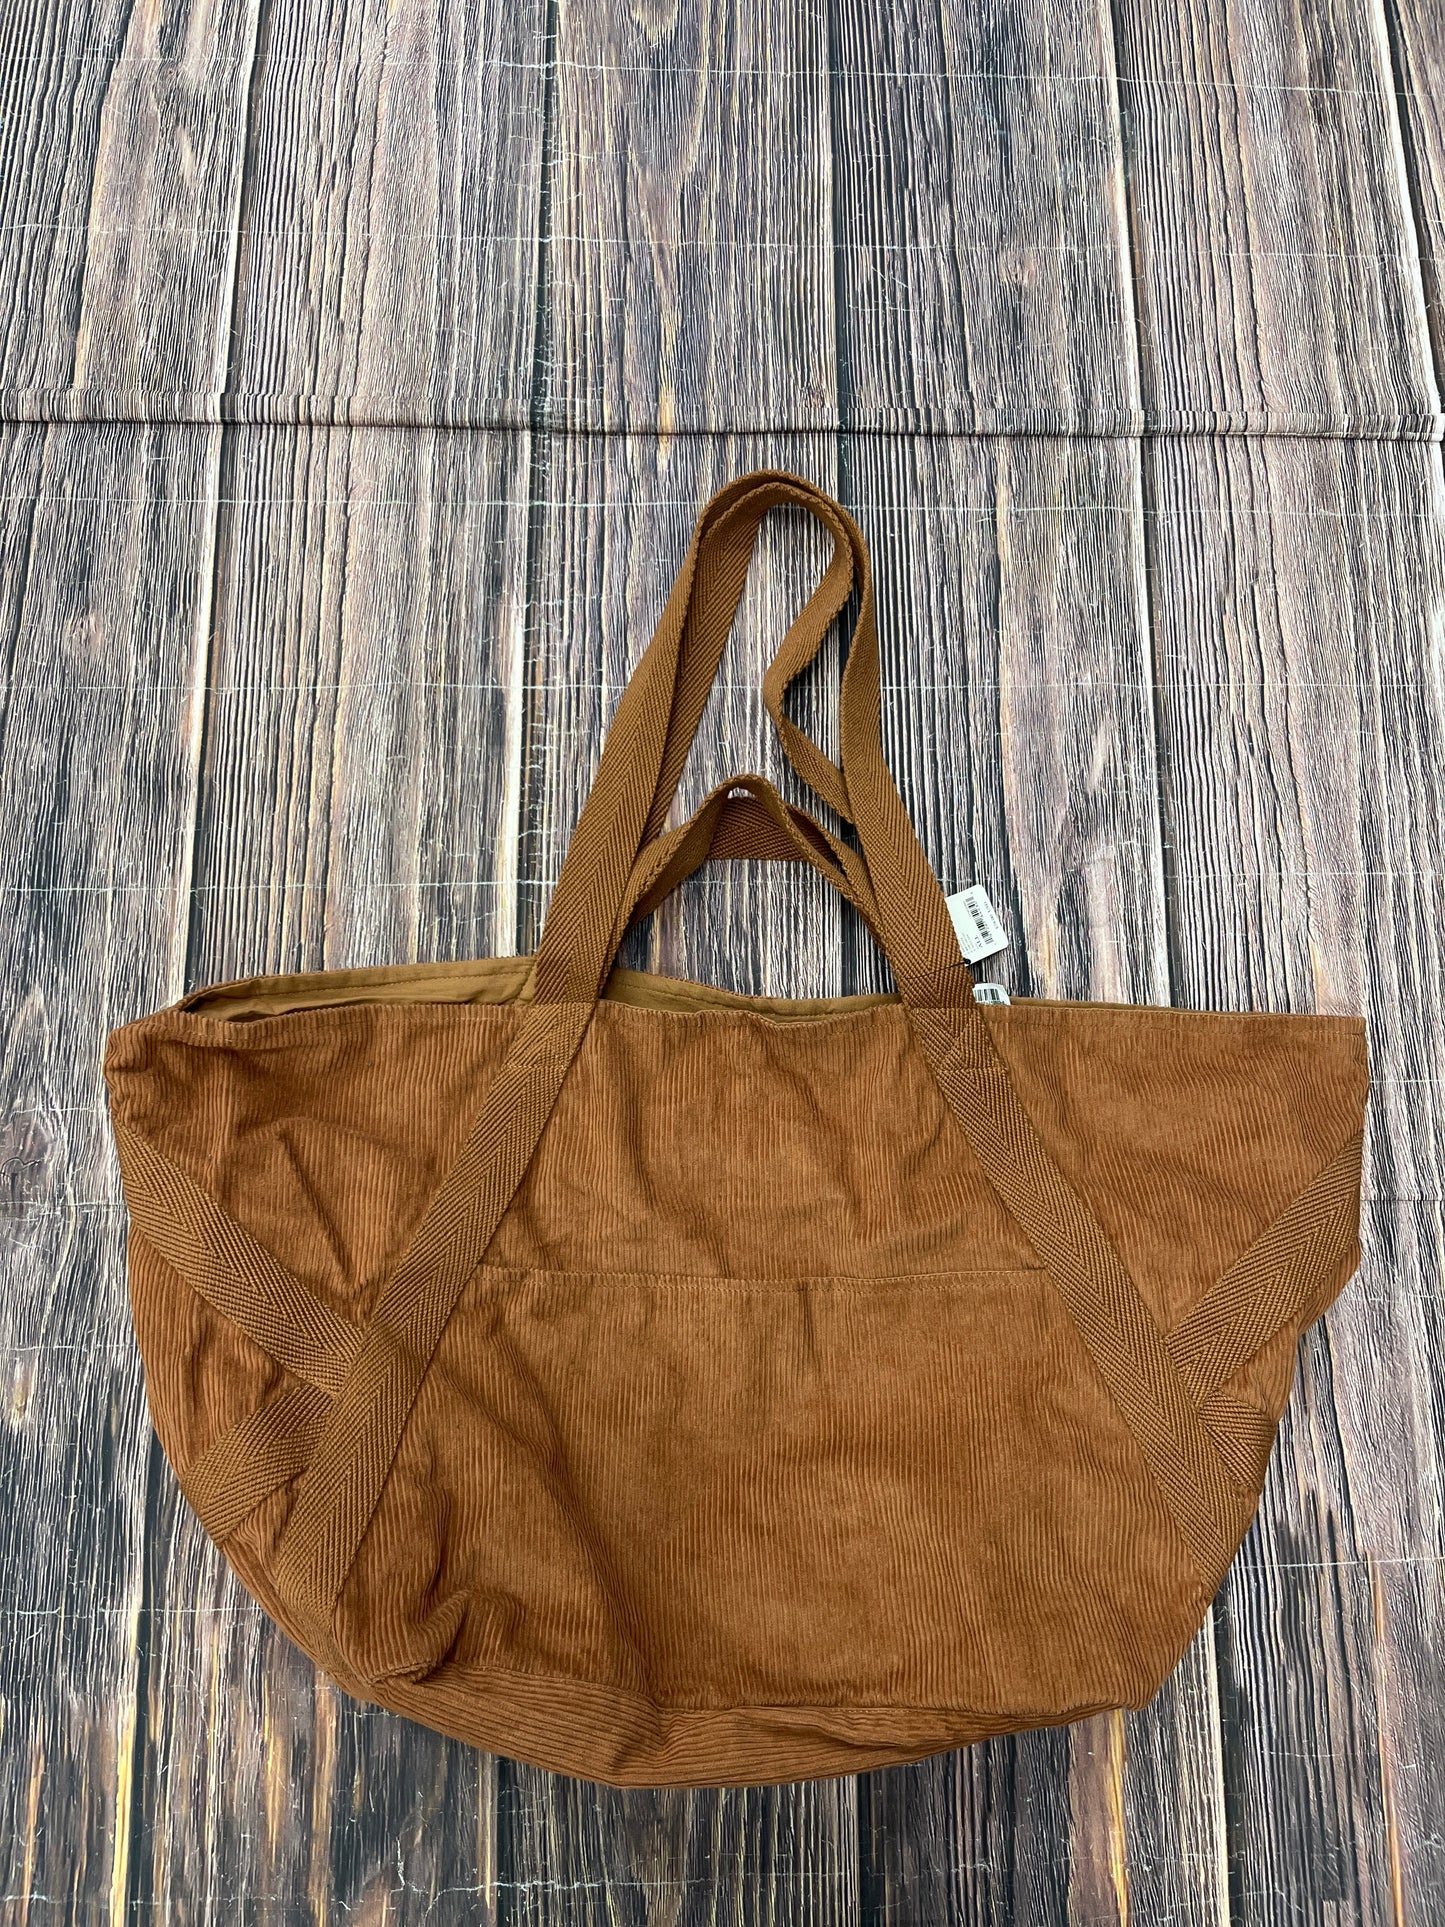 Tote Free People, Size Large